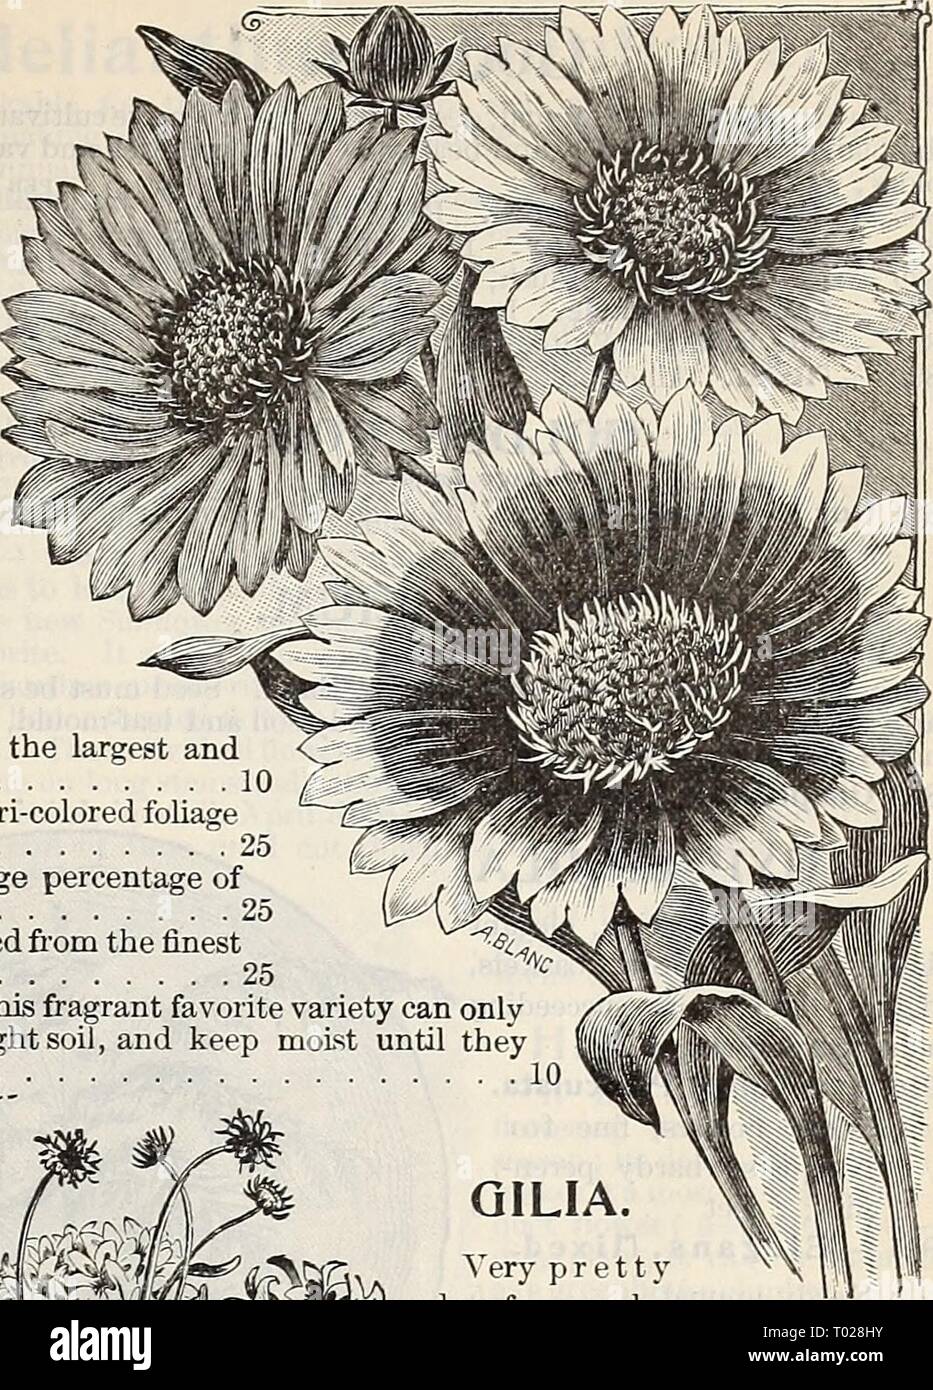 Dreer's garden calendar : 1897 . dreersgardencale1897henr Year: 1897  DREER'S RELIABLE FLOWER SEEDS. 7J GAILLARDIA. Splendid bedding plants, remarkable for the profu- sion, size and brilliancy of their flowers, continuing in bloom during the summer and autumn; annuals; 1 $ feet. per pkt.' 5837 Gaillardia Picta. Crimson and orange ... 5 5838 — Picta Lorenziana. A charming profuse double flowering strain; beautiful mixed colors 5 5840 — Mixed. Fine colors ... 5 5841 — Grandiflora Superba. Splendid new per- ennial varieties with very large flowers, dark crimson centres, marked with rings of many  Stock Photo